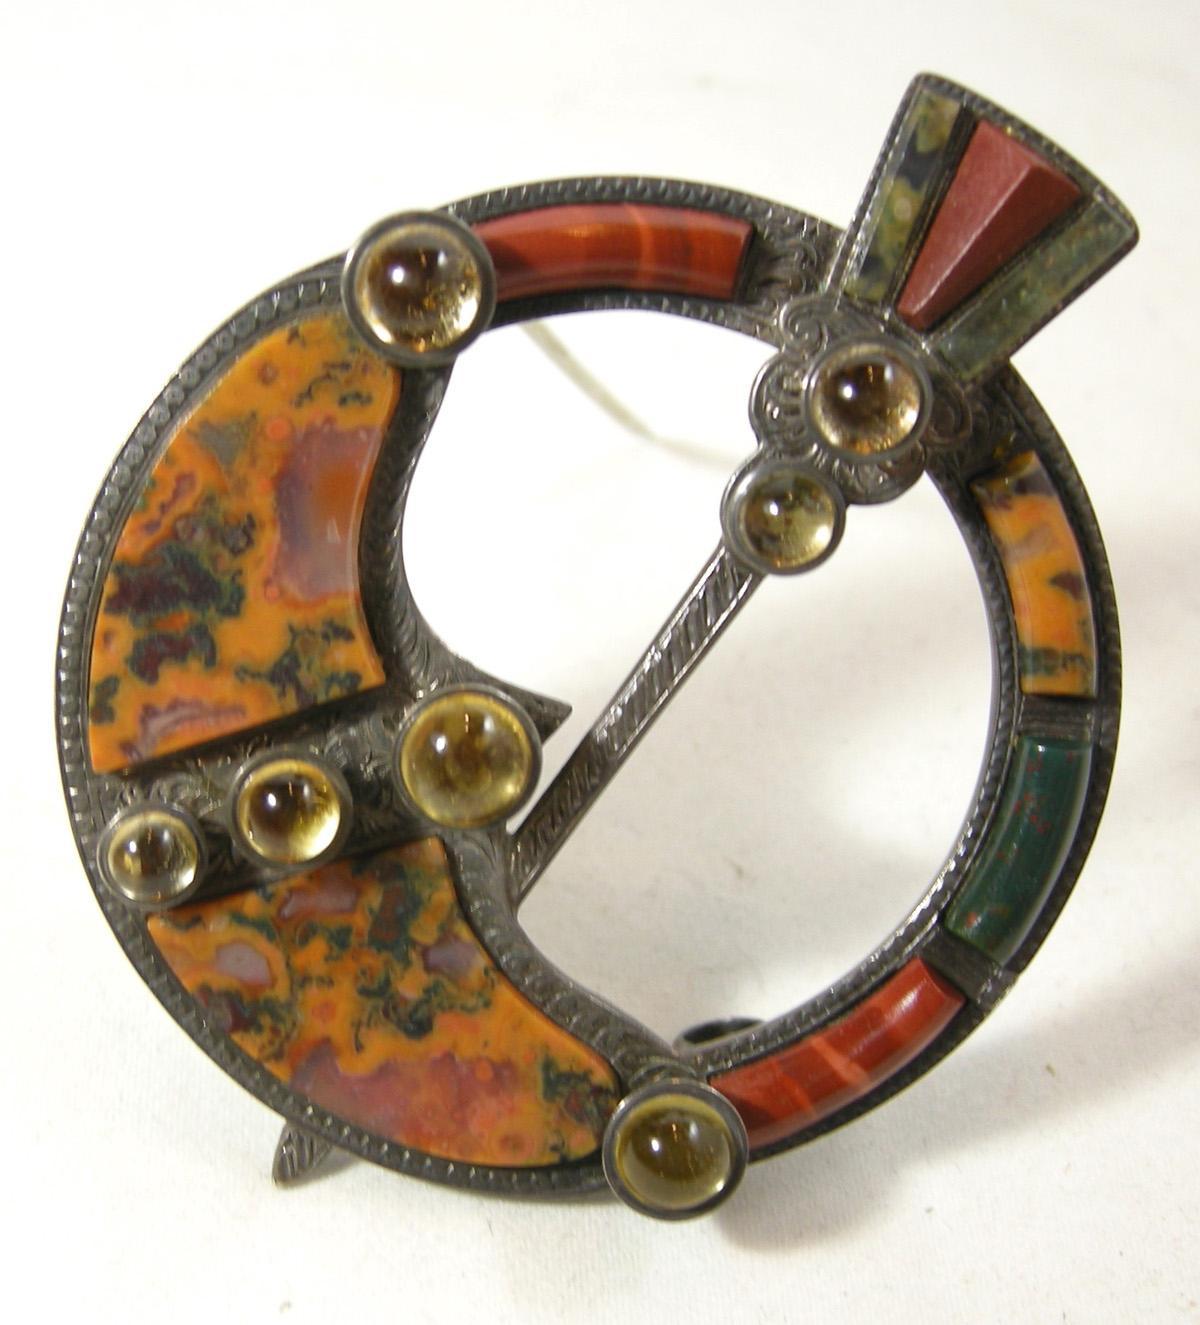 This 1880’s Scottish brooch is sterling silver with beautiful speckled agates.  It has citrine cabochons down the middle and on each side.  A scepter, with two more citrine cabochons on top, goes through the brooch.  It is signed on the back with a